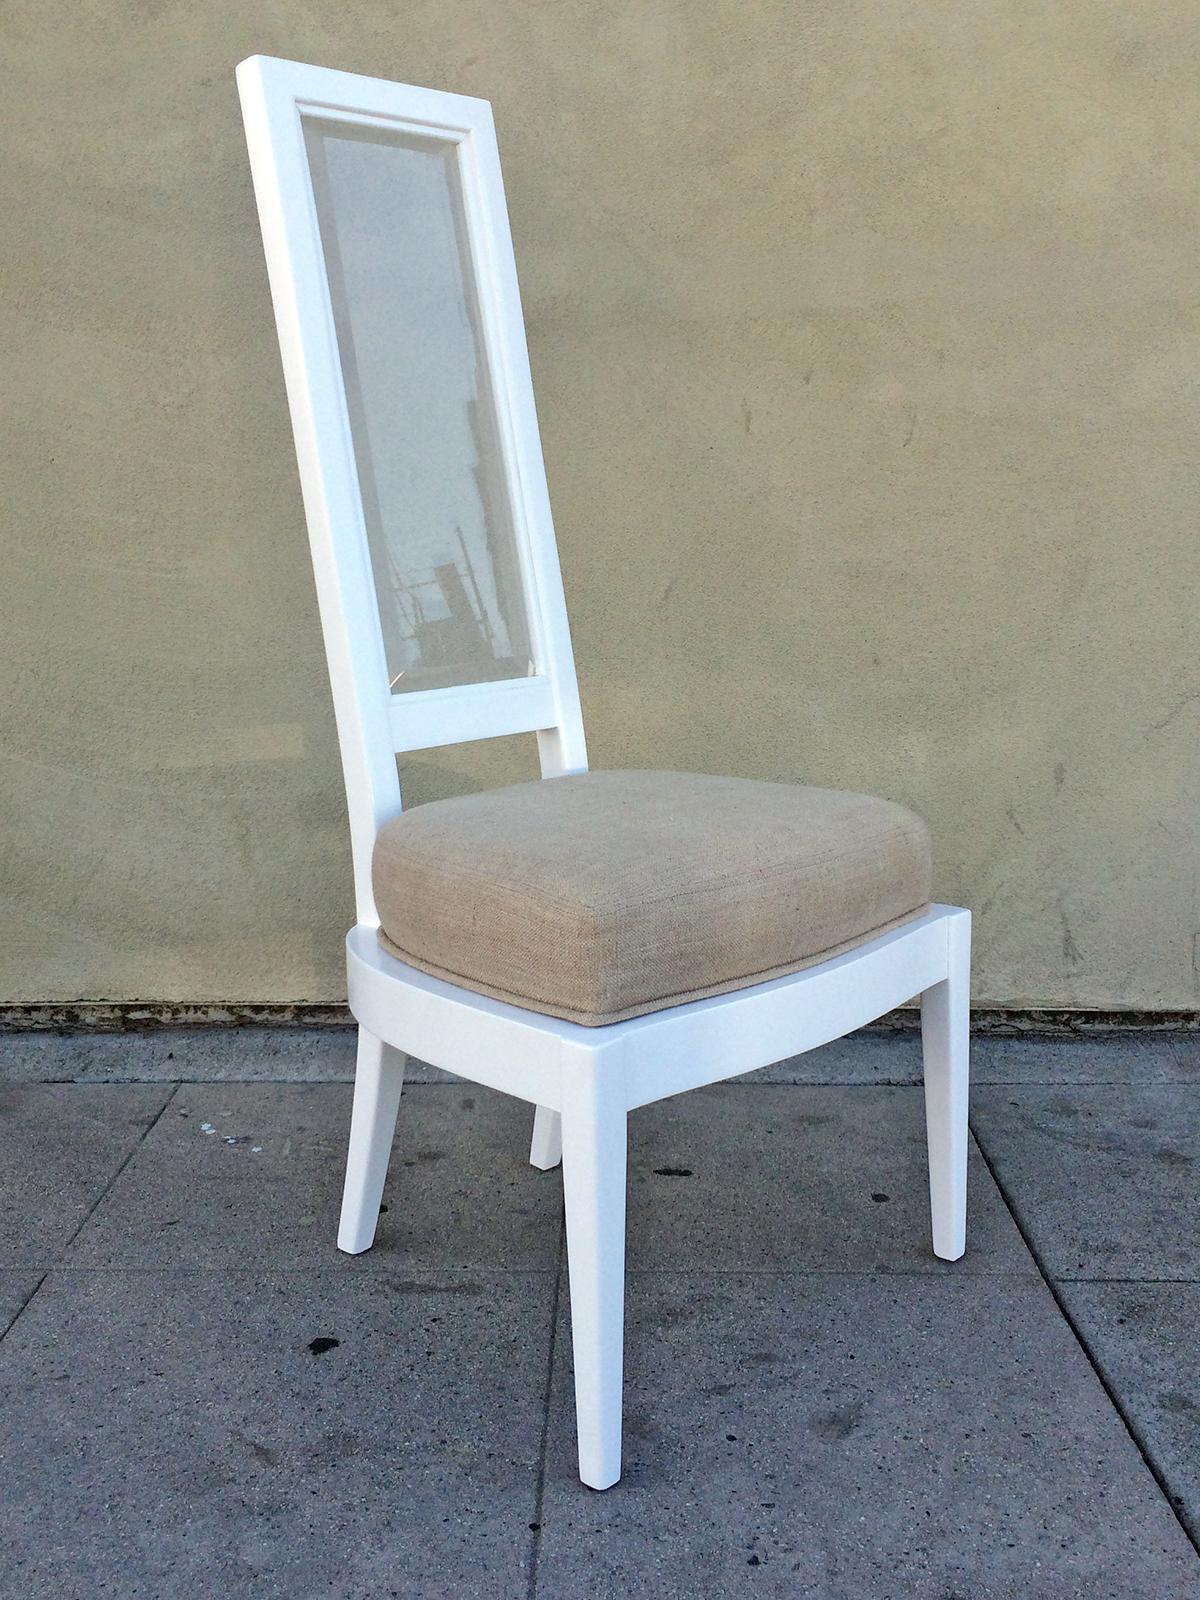 Pair of 1970s White Lacquer and Lucite Beige Dining Chairs In Excellent Condition For Sale In Pasadena, CA